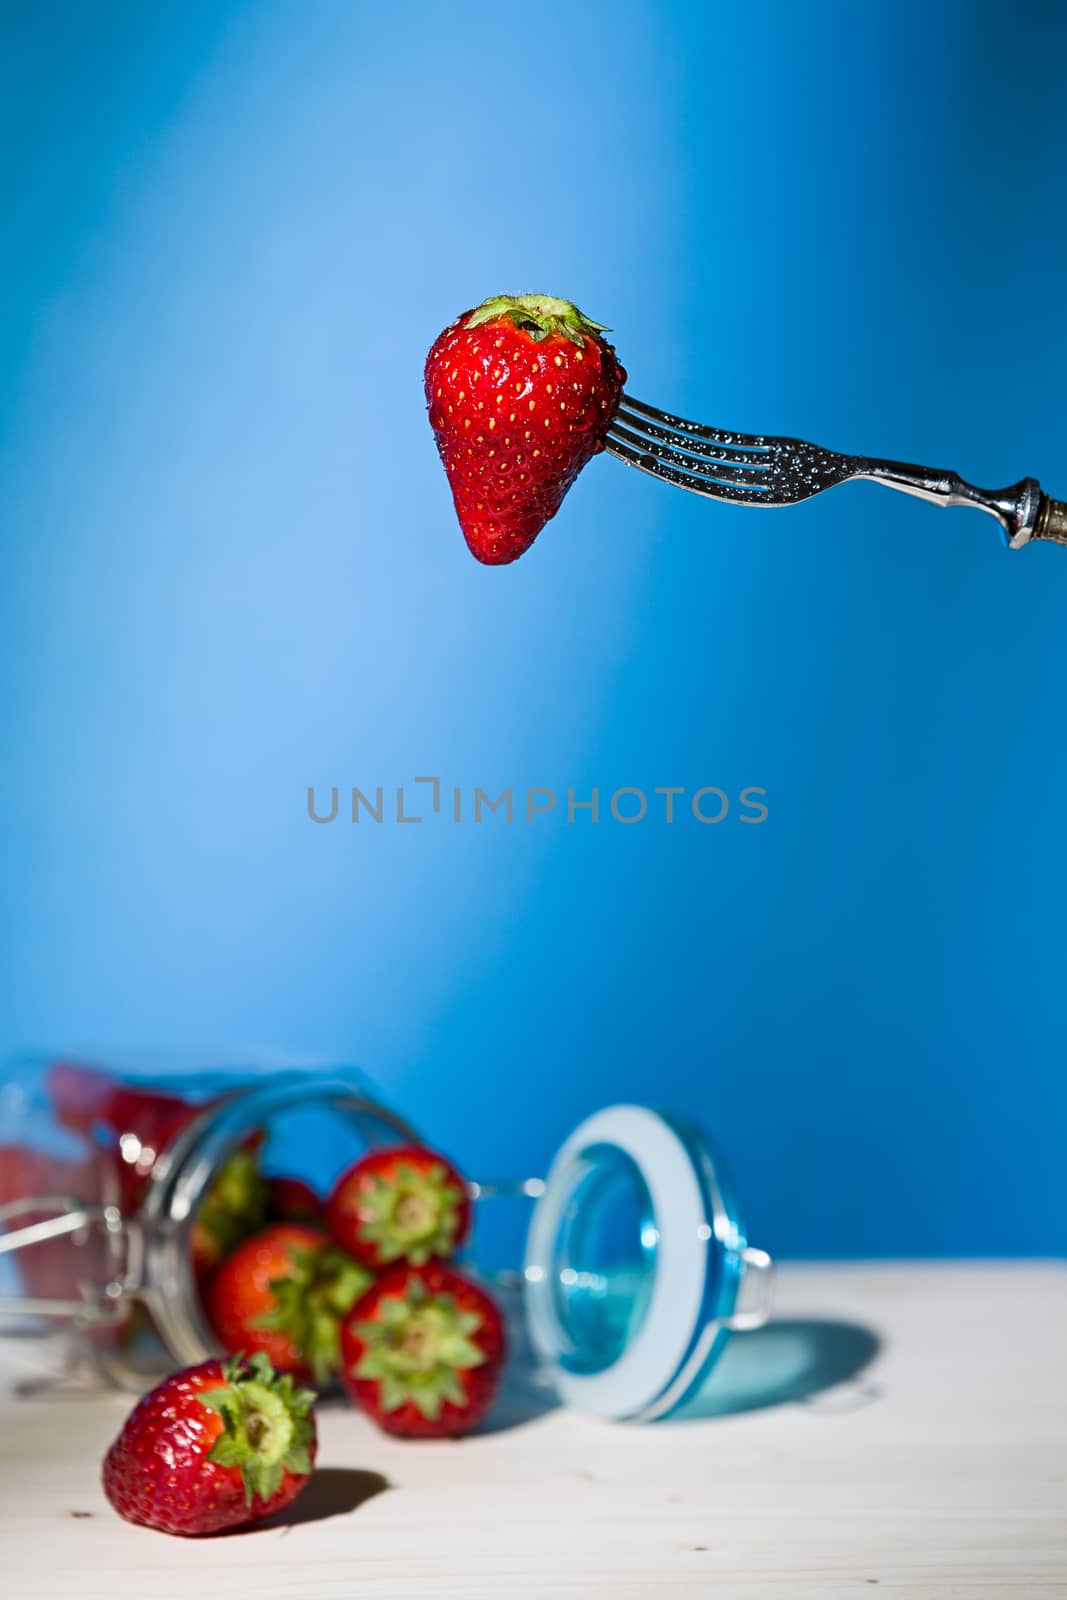 Strawberry suspended from a fork and under a jar of strawberries with blue background